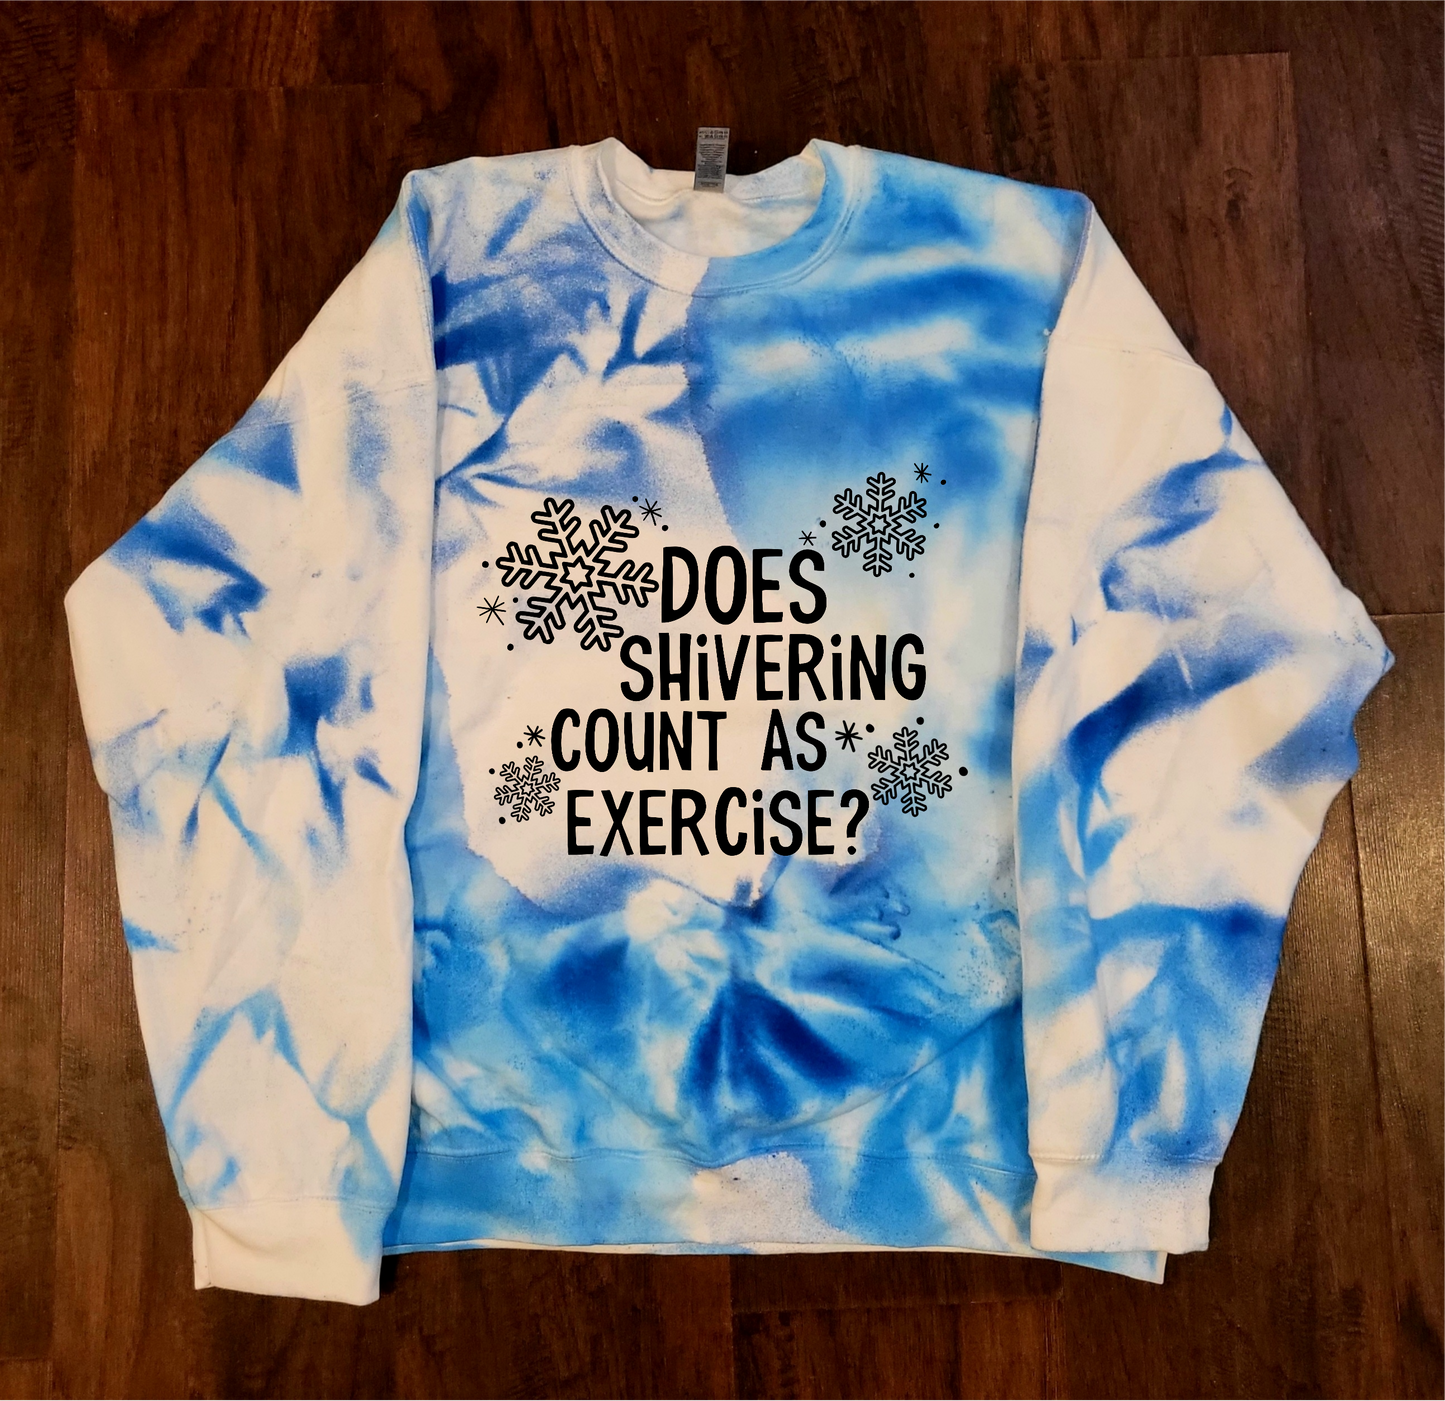 Does shivering count as exercise?